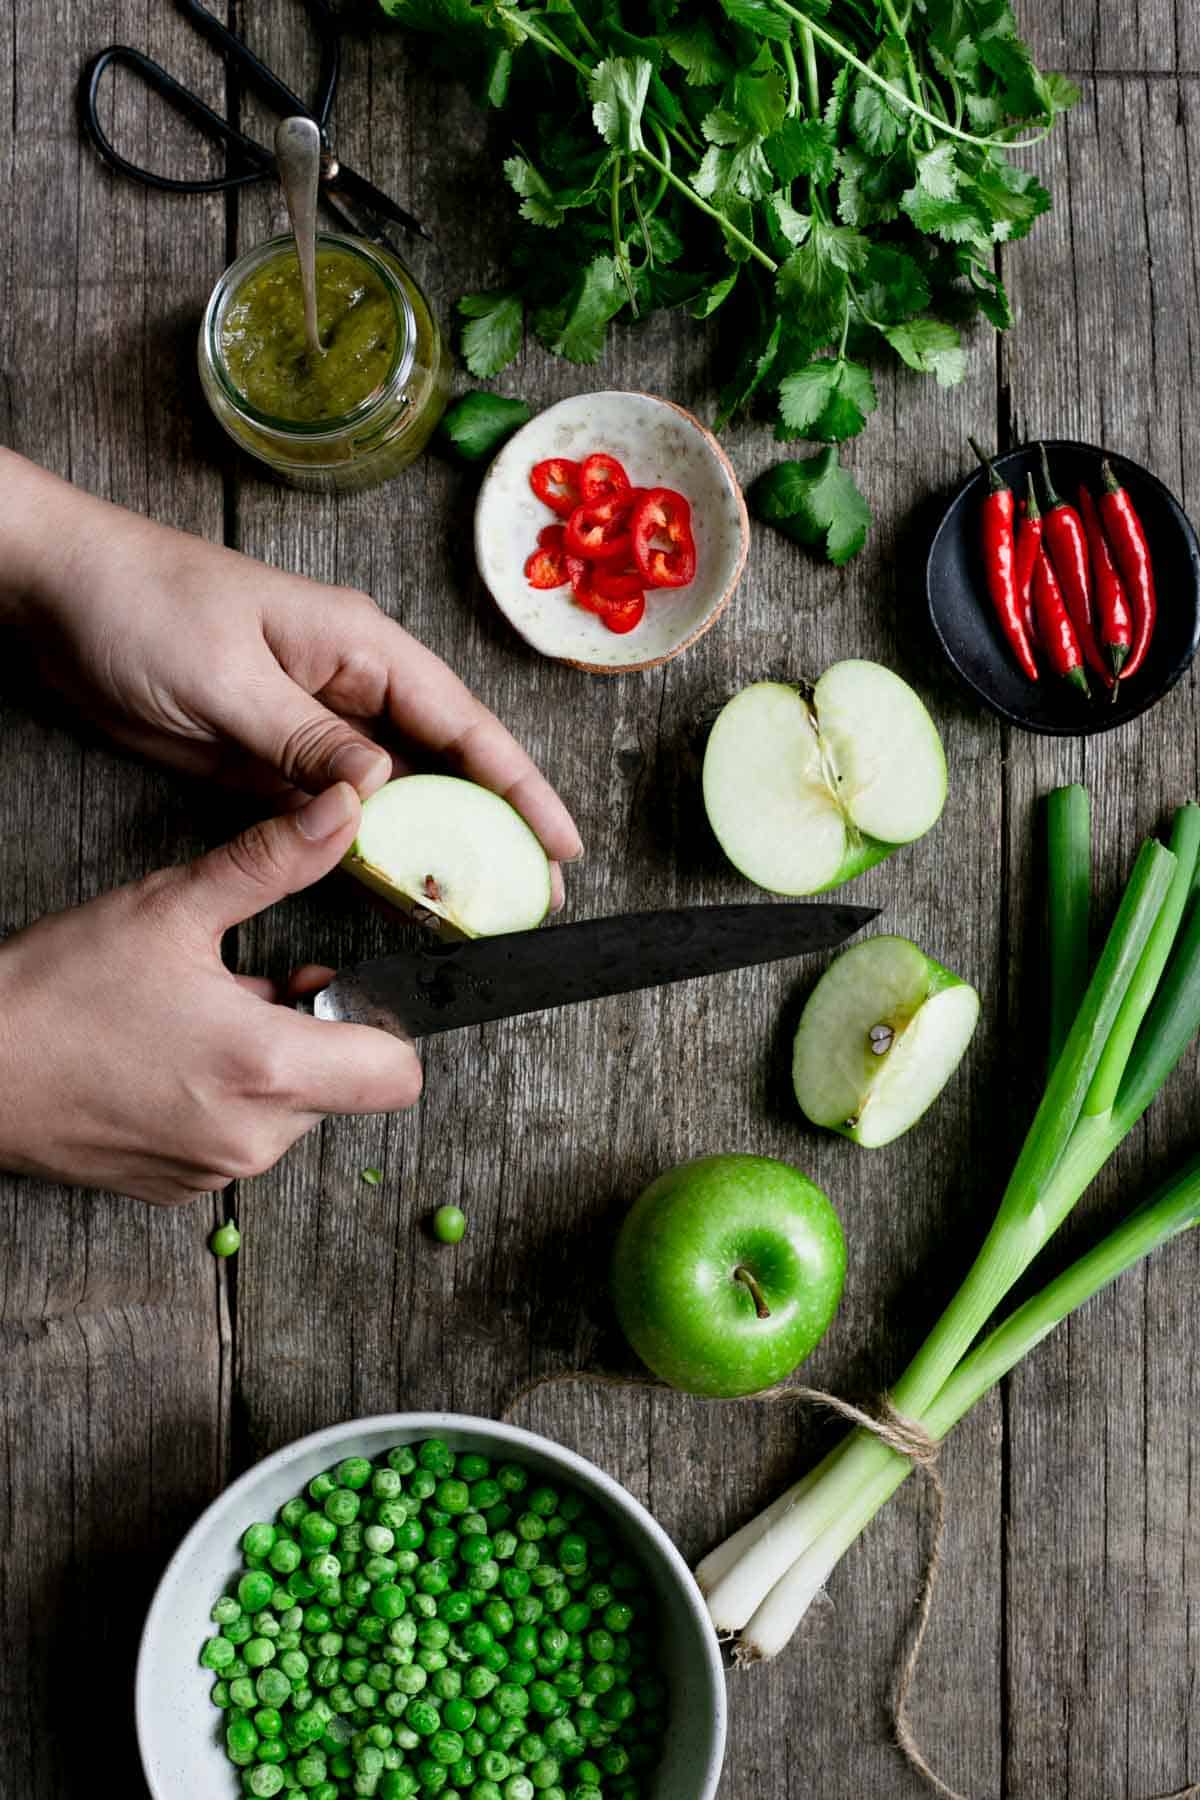 Easy Thai style pea and apple soup, simple ingredients, delicious flavours. #vegansoup #thaisoup | via @annabanana.co